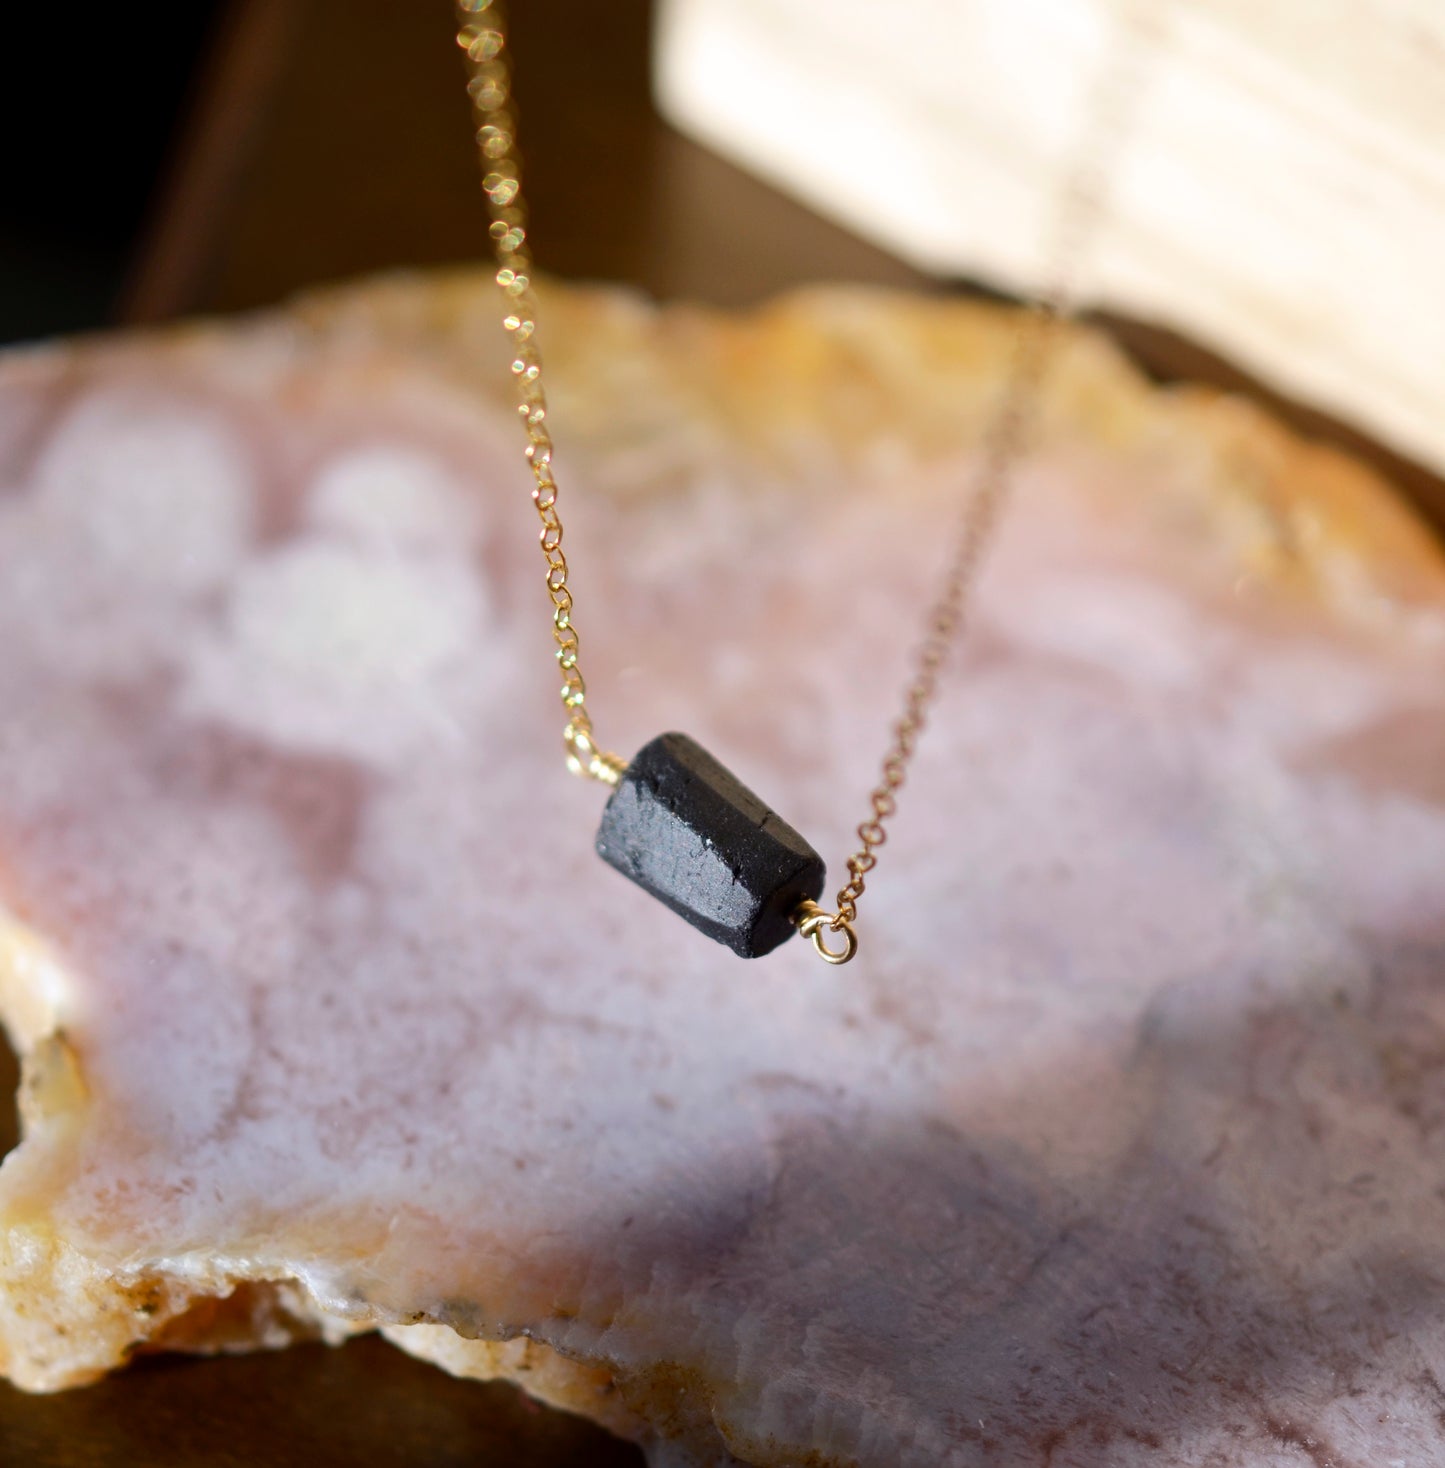 Raw Black Tourmaline Necklace, Sterling Silver, 14k Gold Filled, Black Tourmaline Necklace, Schorl Pendant, Protection Necklace, For Women